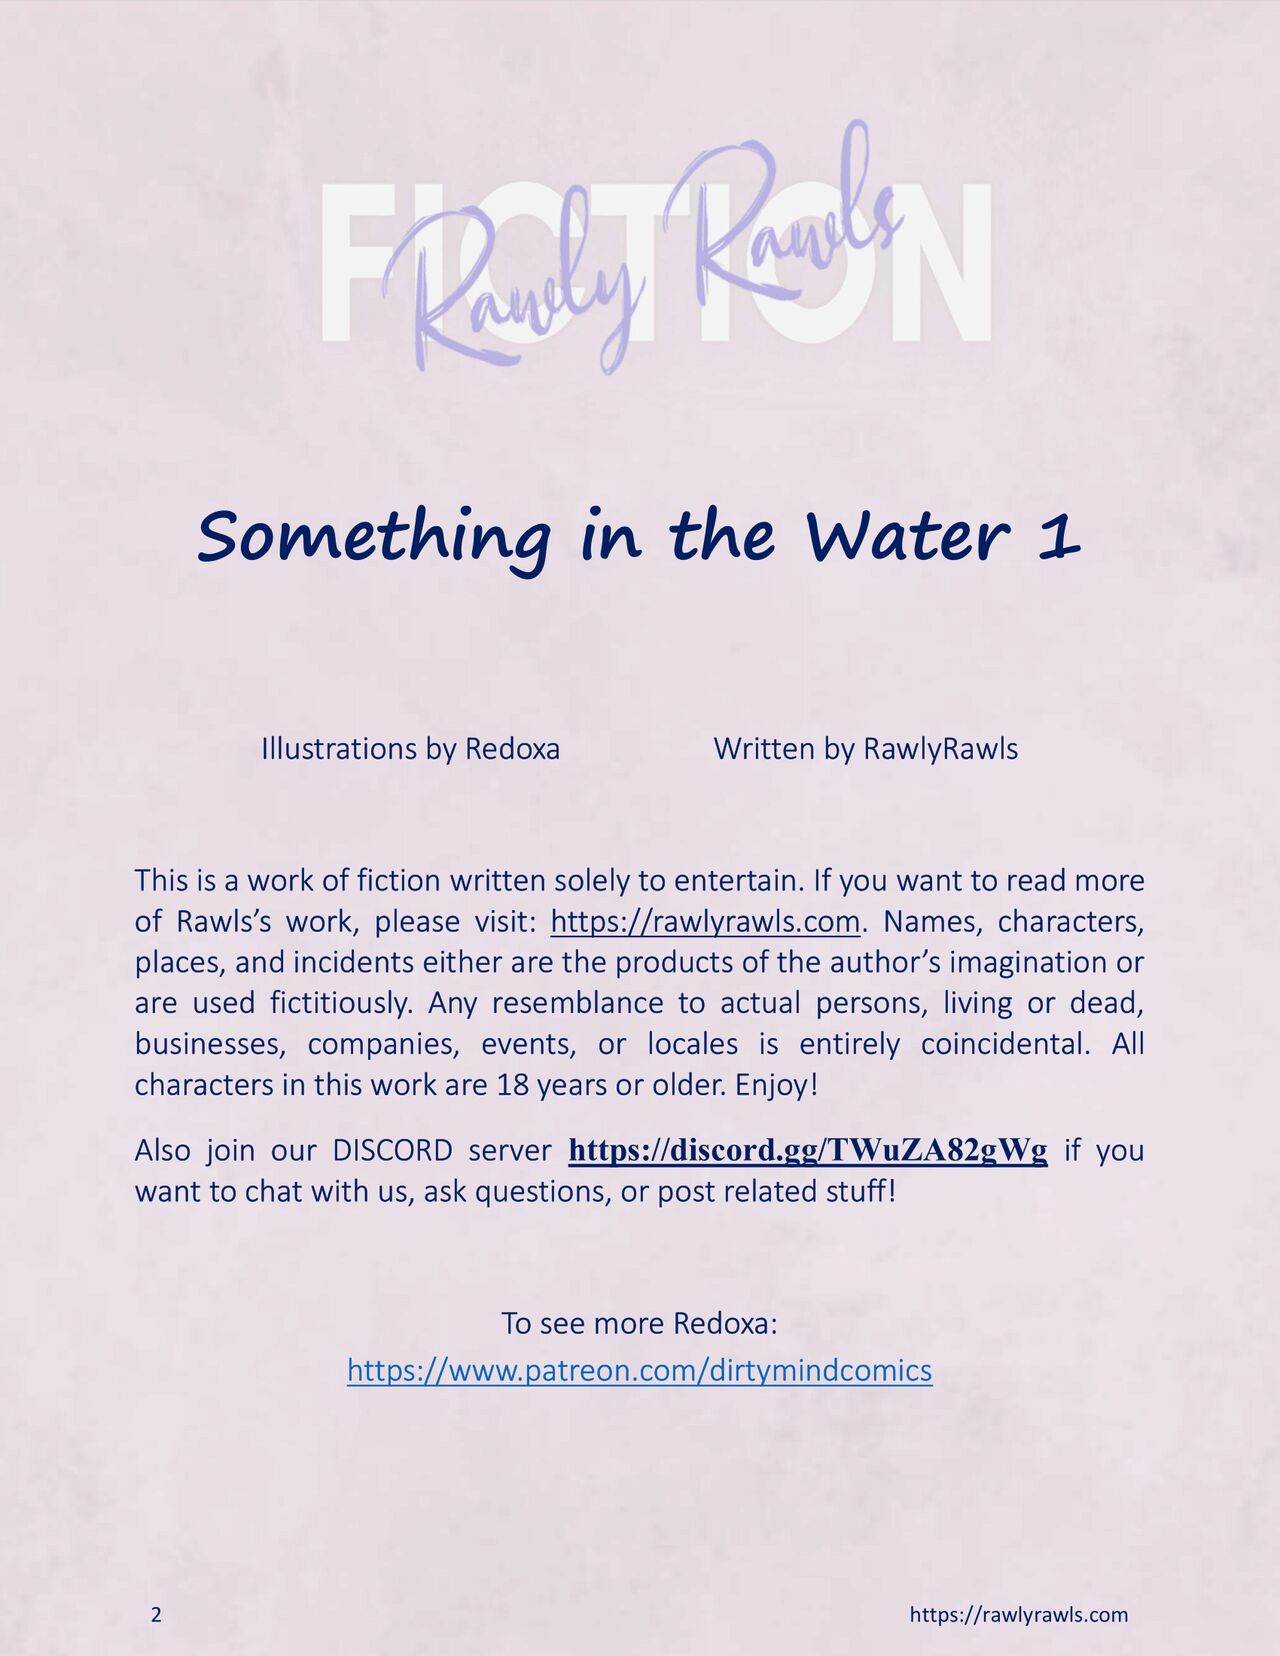 There's Something in the Water Chapter 1: Rawly Rawls Fiction 2